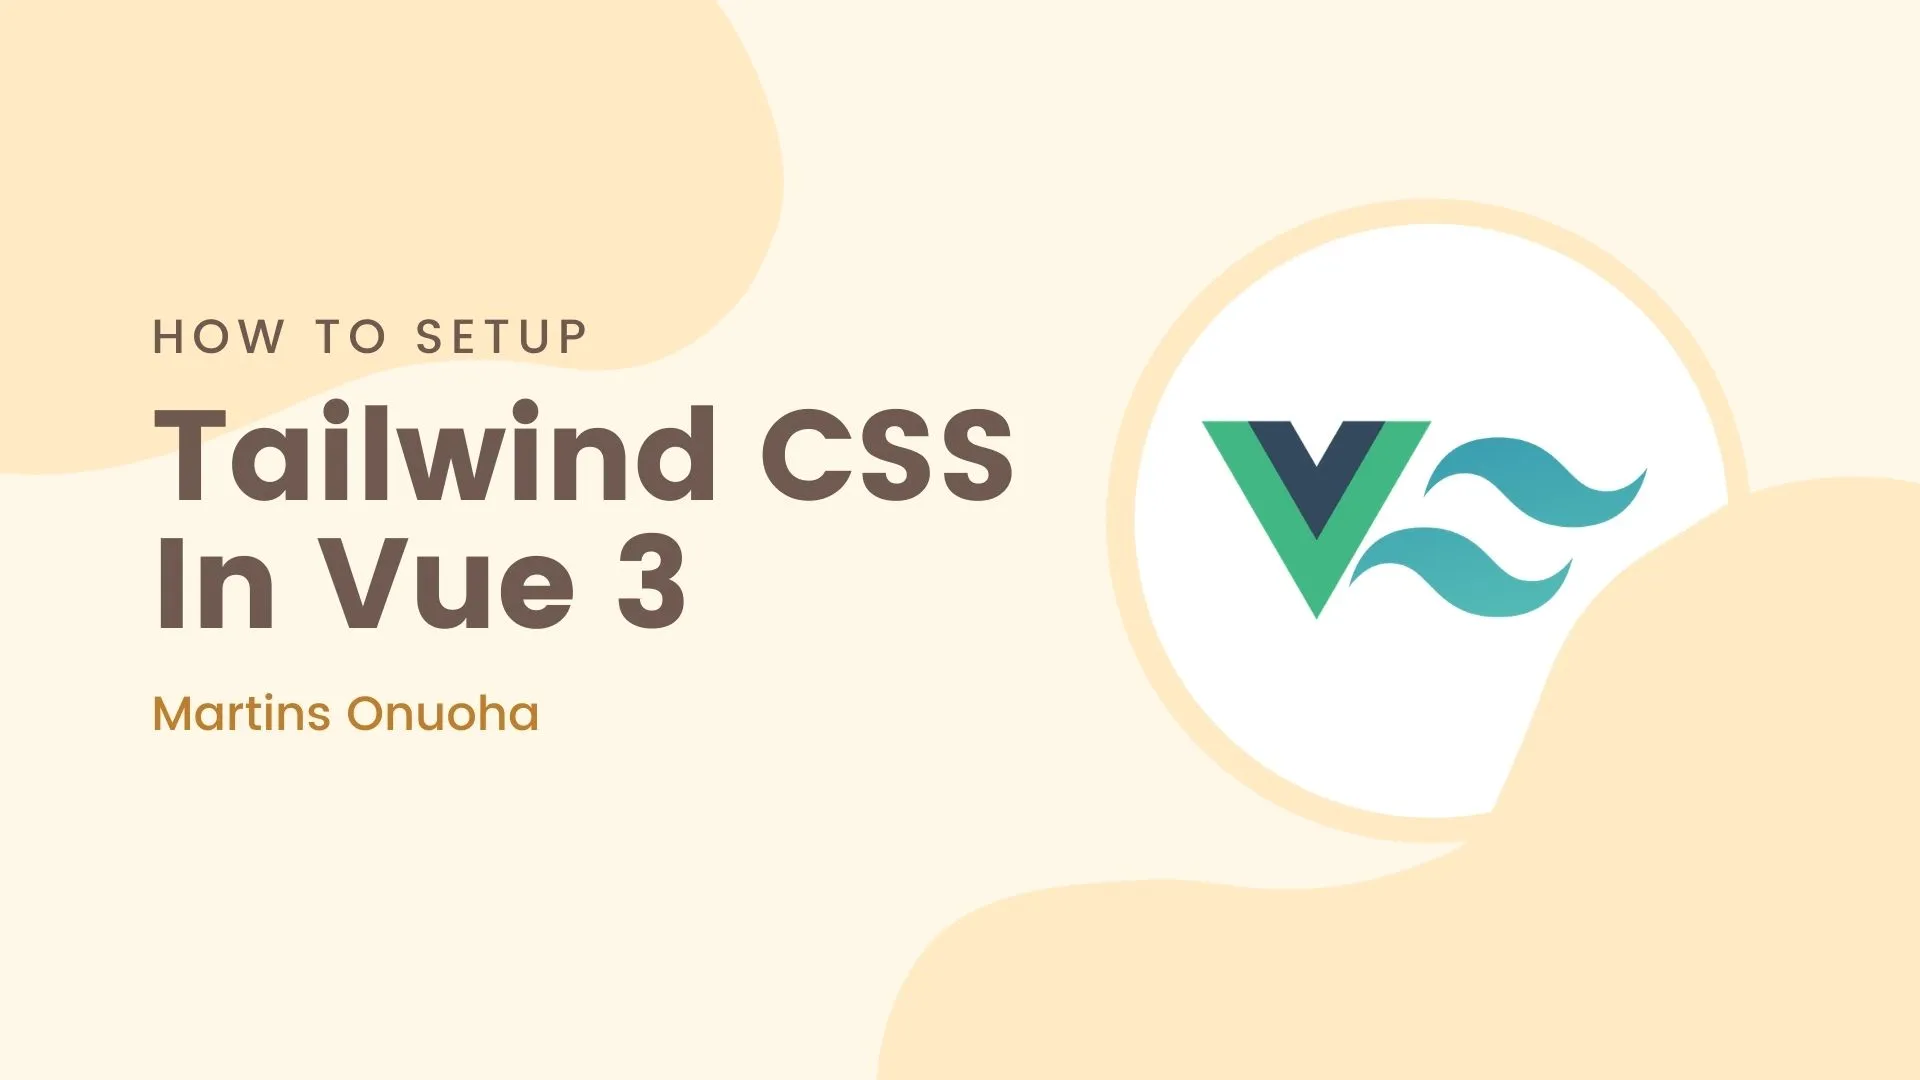 How to Setup Tailwind CSS in Vue 3